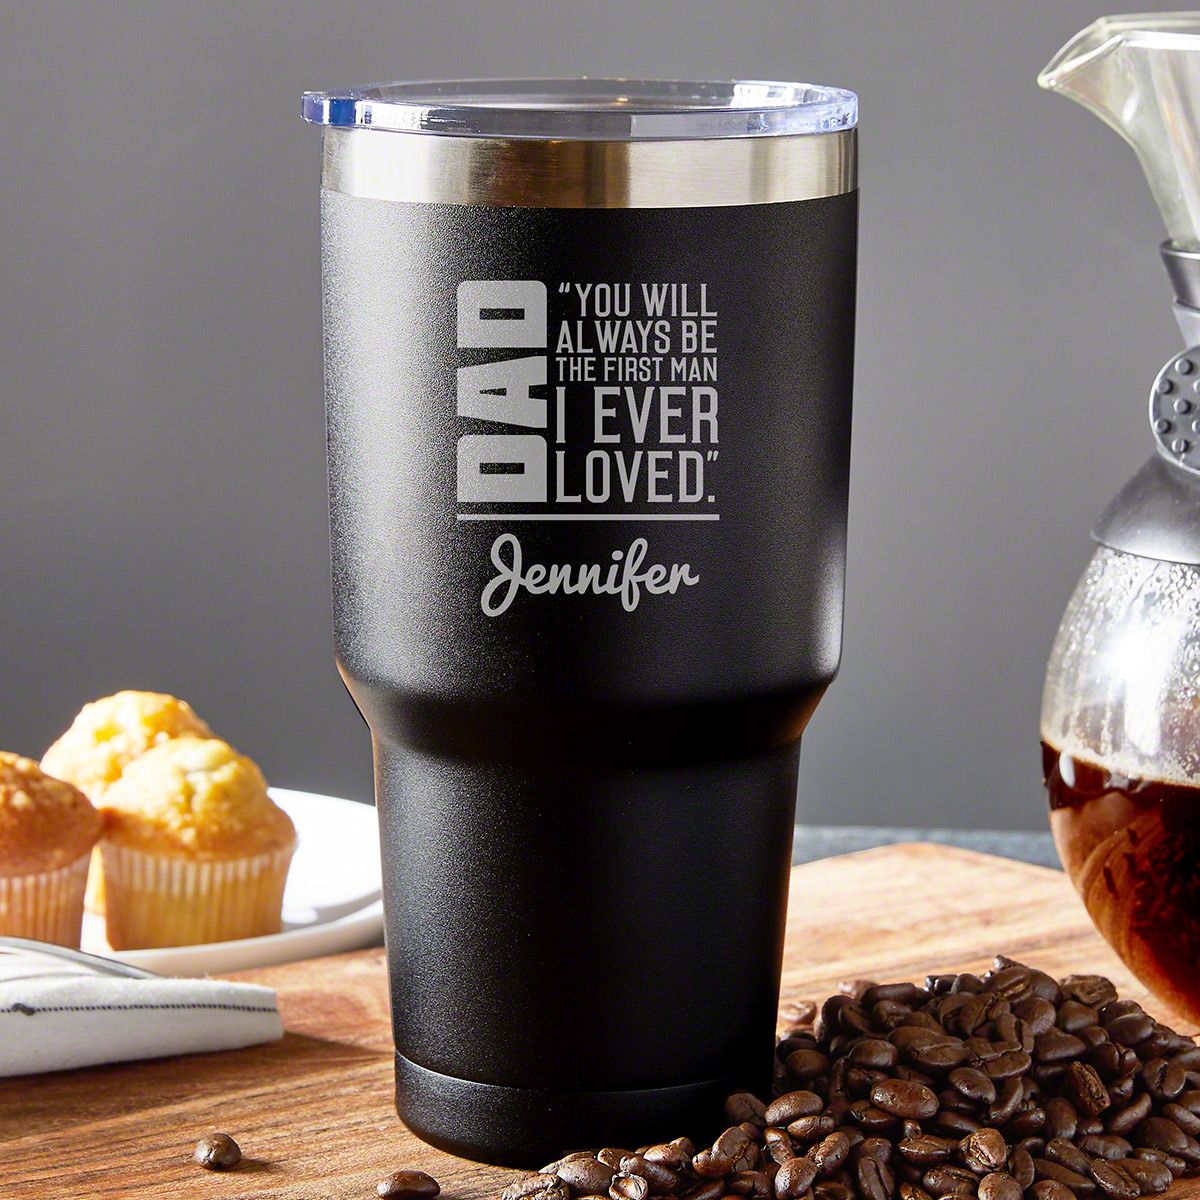 2. How Personalized Insulated Tumblers Conserve Energy and Reduce Waste